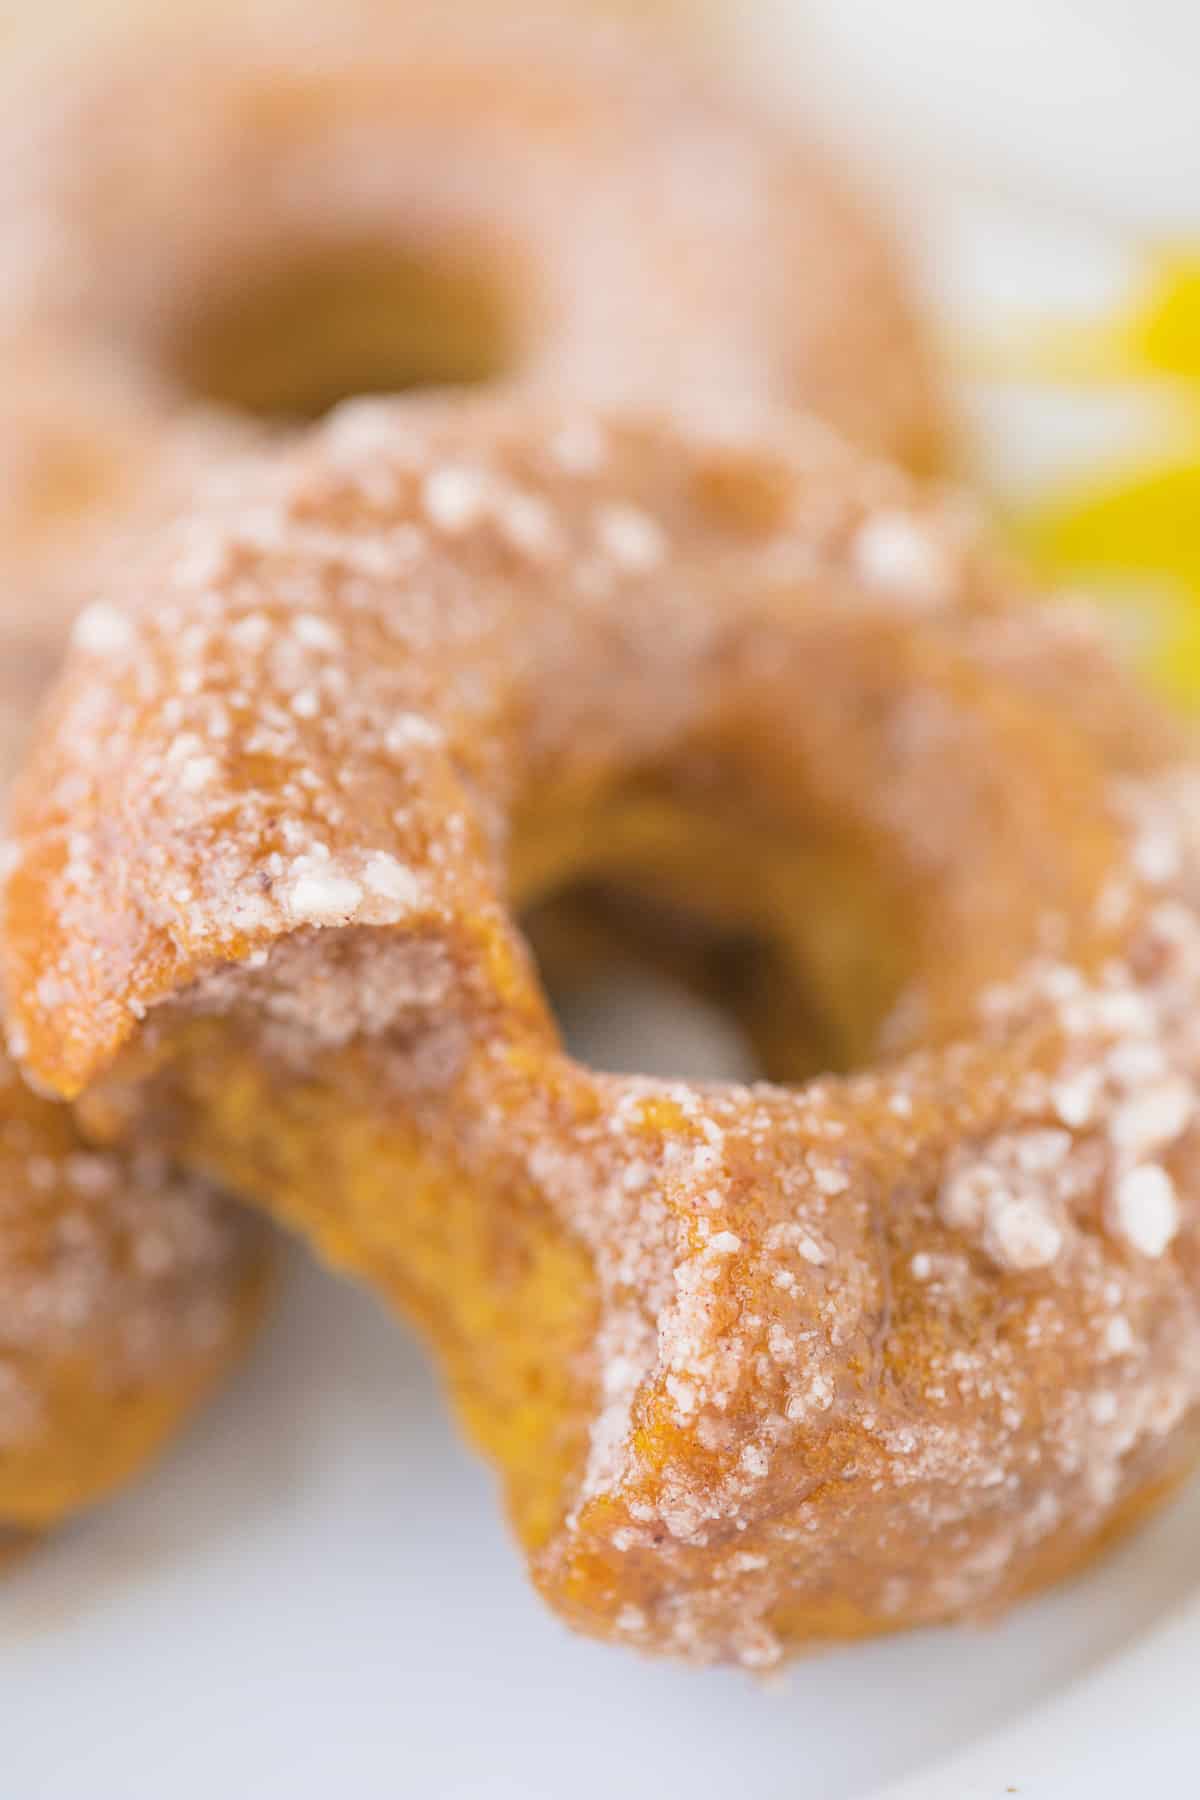 up close picture of a pumpkin baked donut with a bite taken out of it